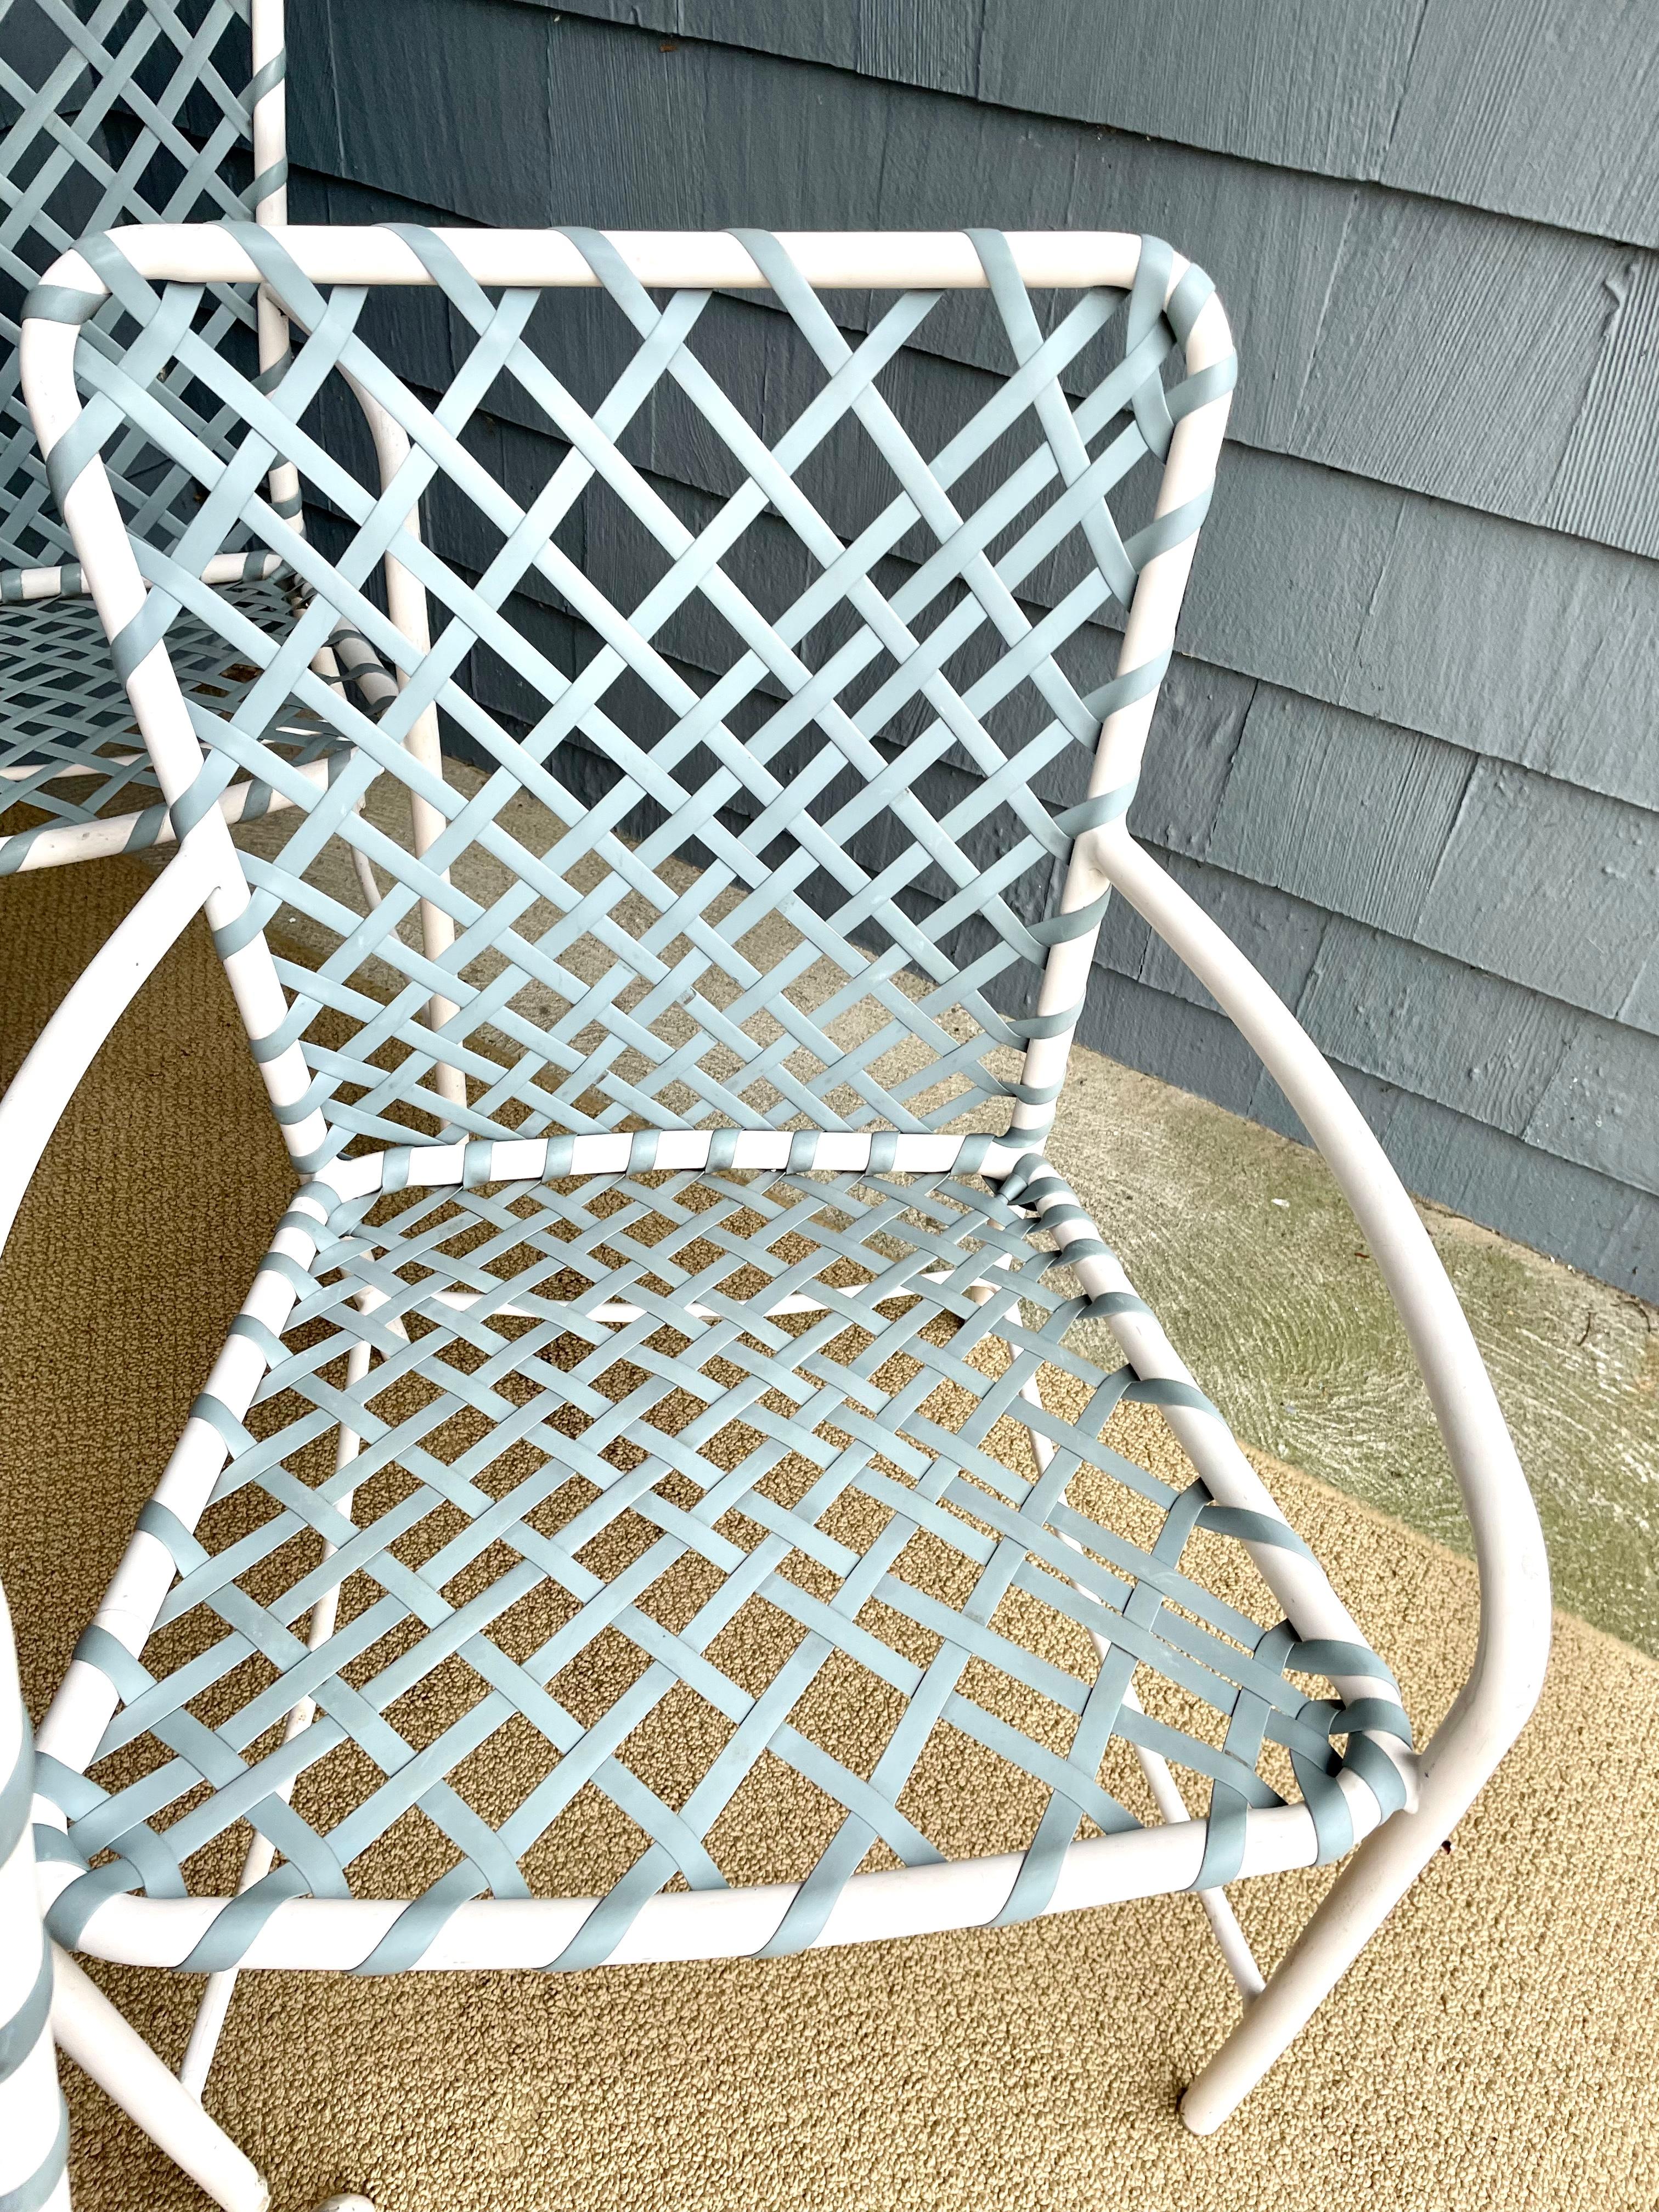 Vintage Brown Jordan Outdoor Patio Chairs Troptione Strapped  3